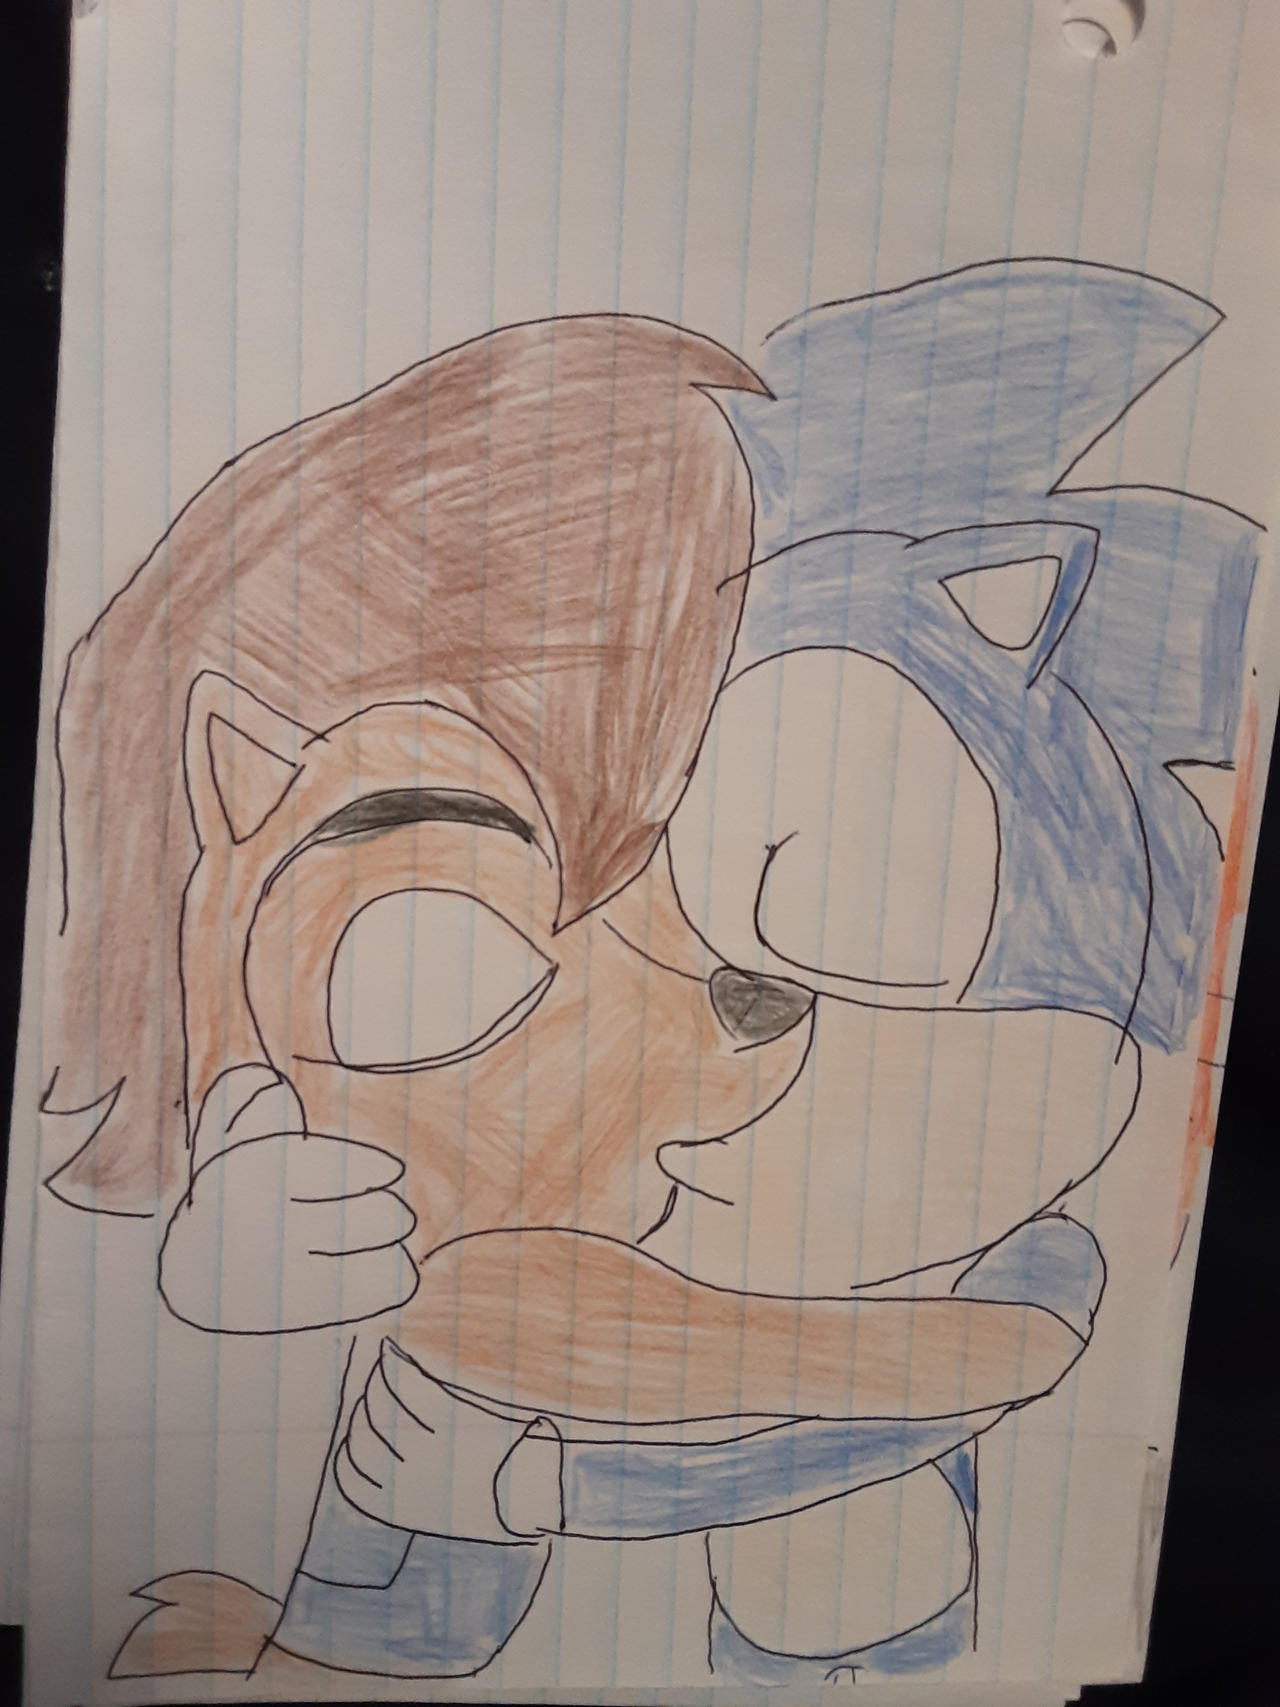 Sonic 3 characters by aliciamartin851 on DeviantArt